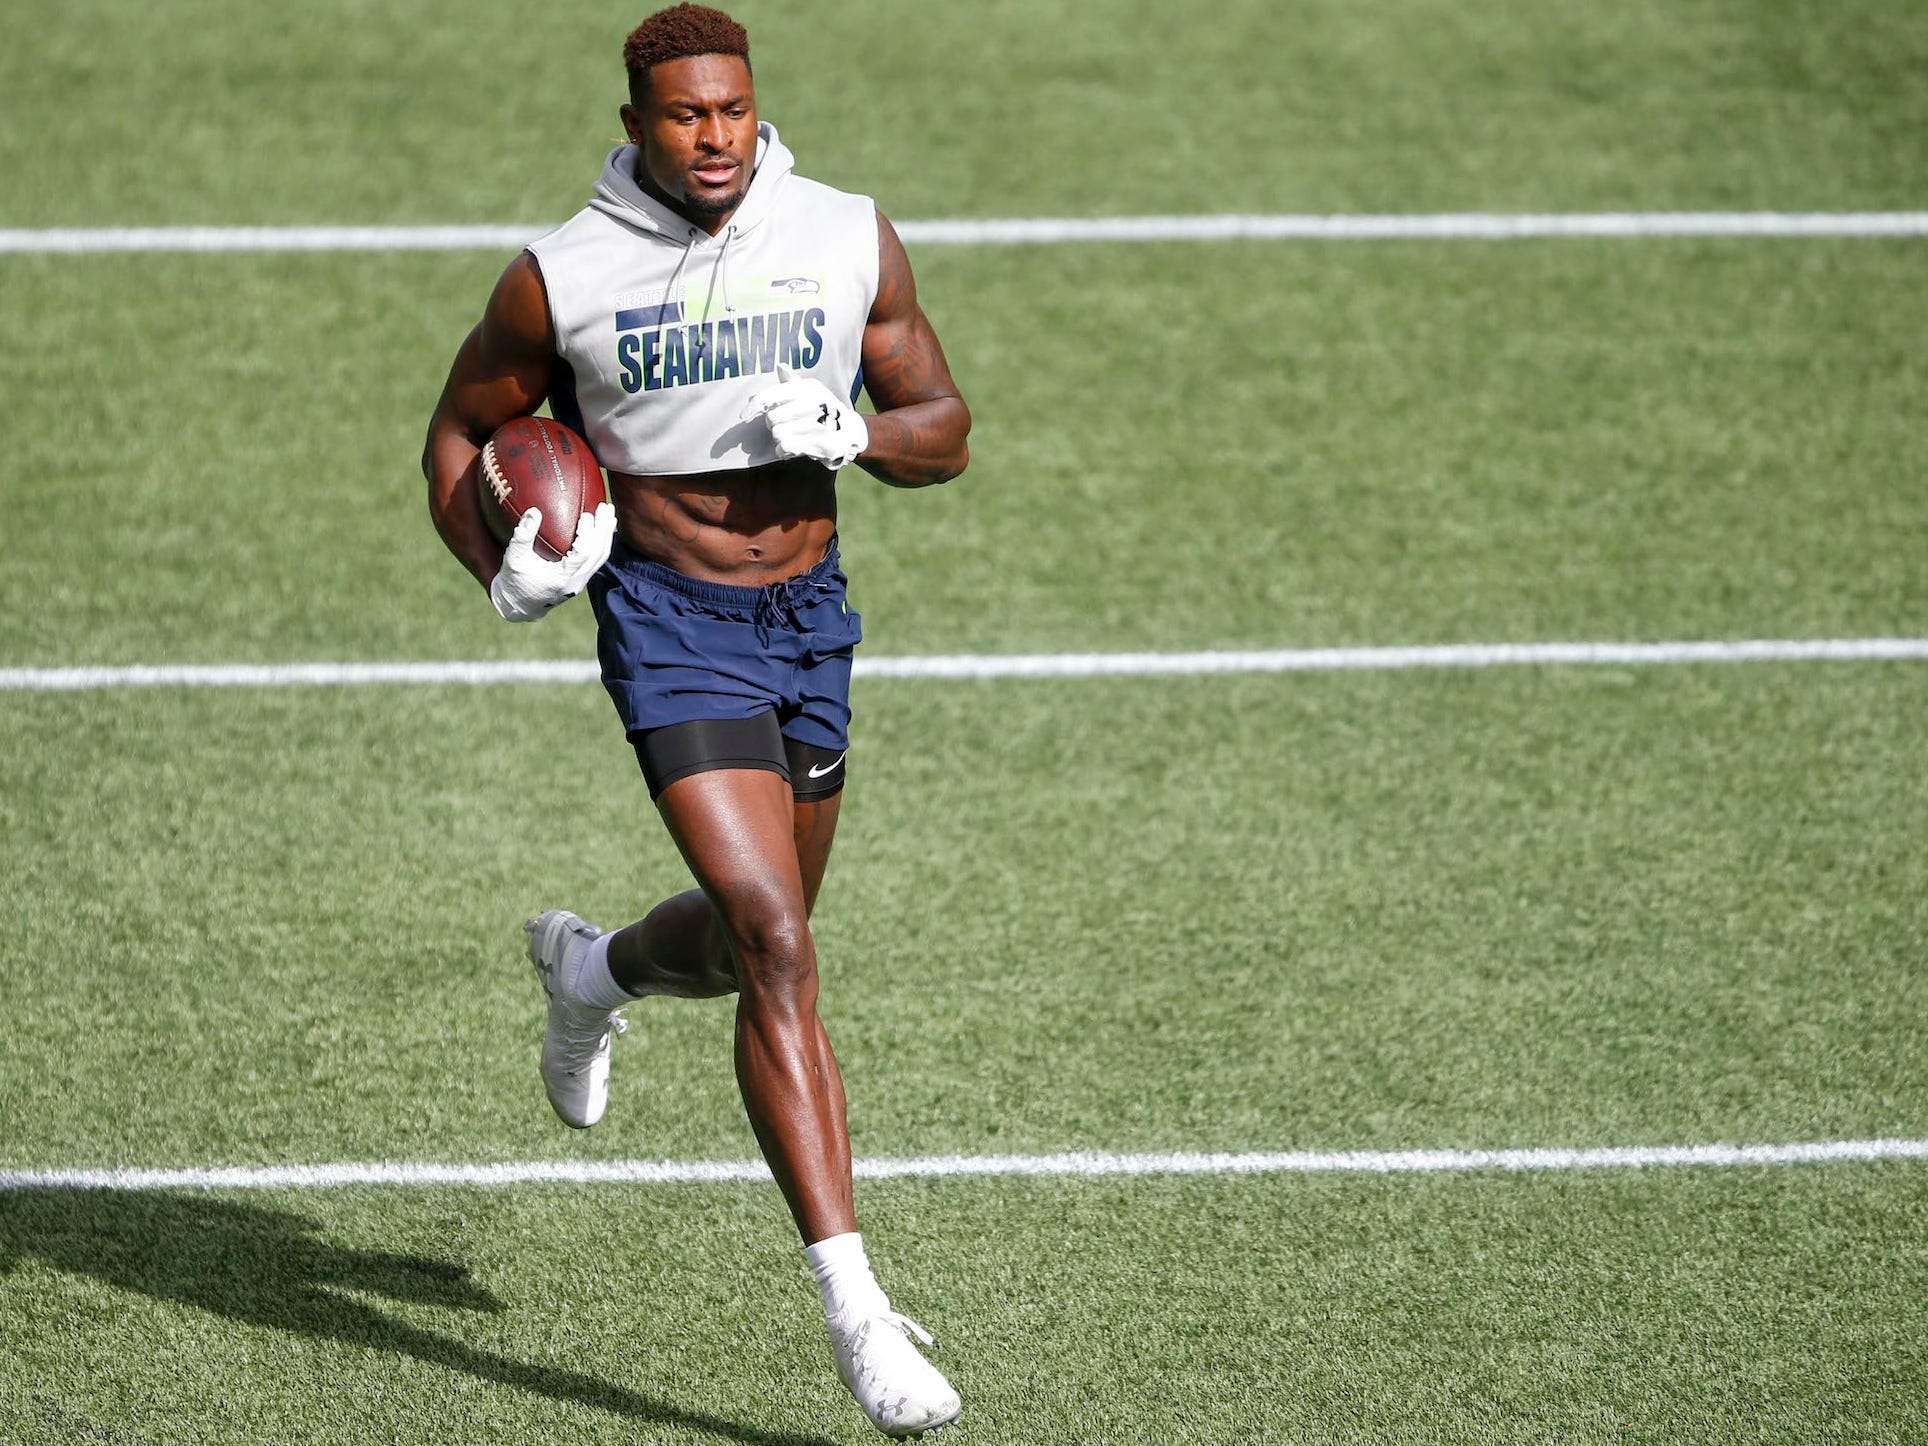 Seattle Seahawks WR DK Metcalf to run in 100-meter dash at USA Track and  Field event - ESPN